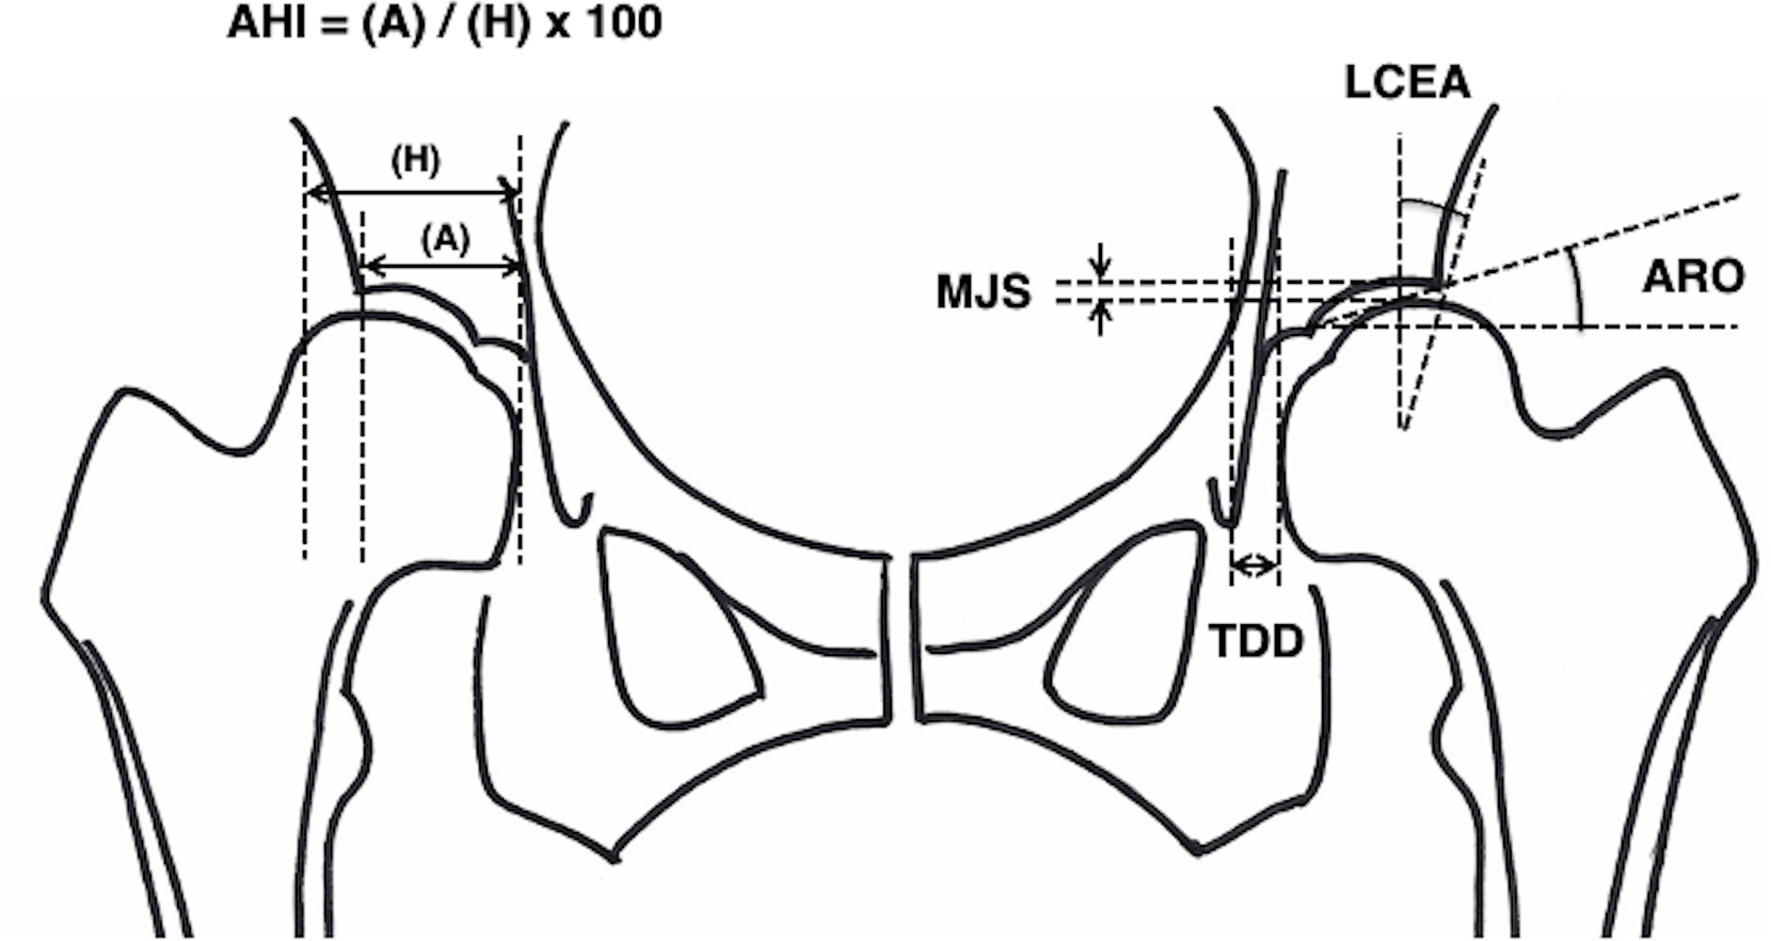 Fig. 4 
            Radiographical parameters for evaluation: a) minimum joint space (MJS), b) lateral centre-edge angle (LCEA), c) acetabular head index (AHI), d) acetabular roof obliquity (ARO), and e) tear drop distance (TDD).
          